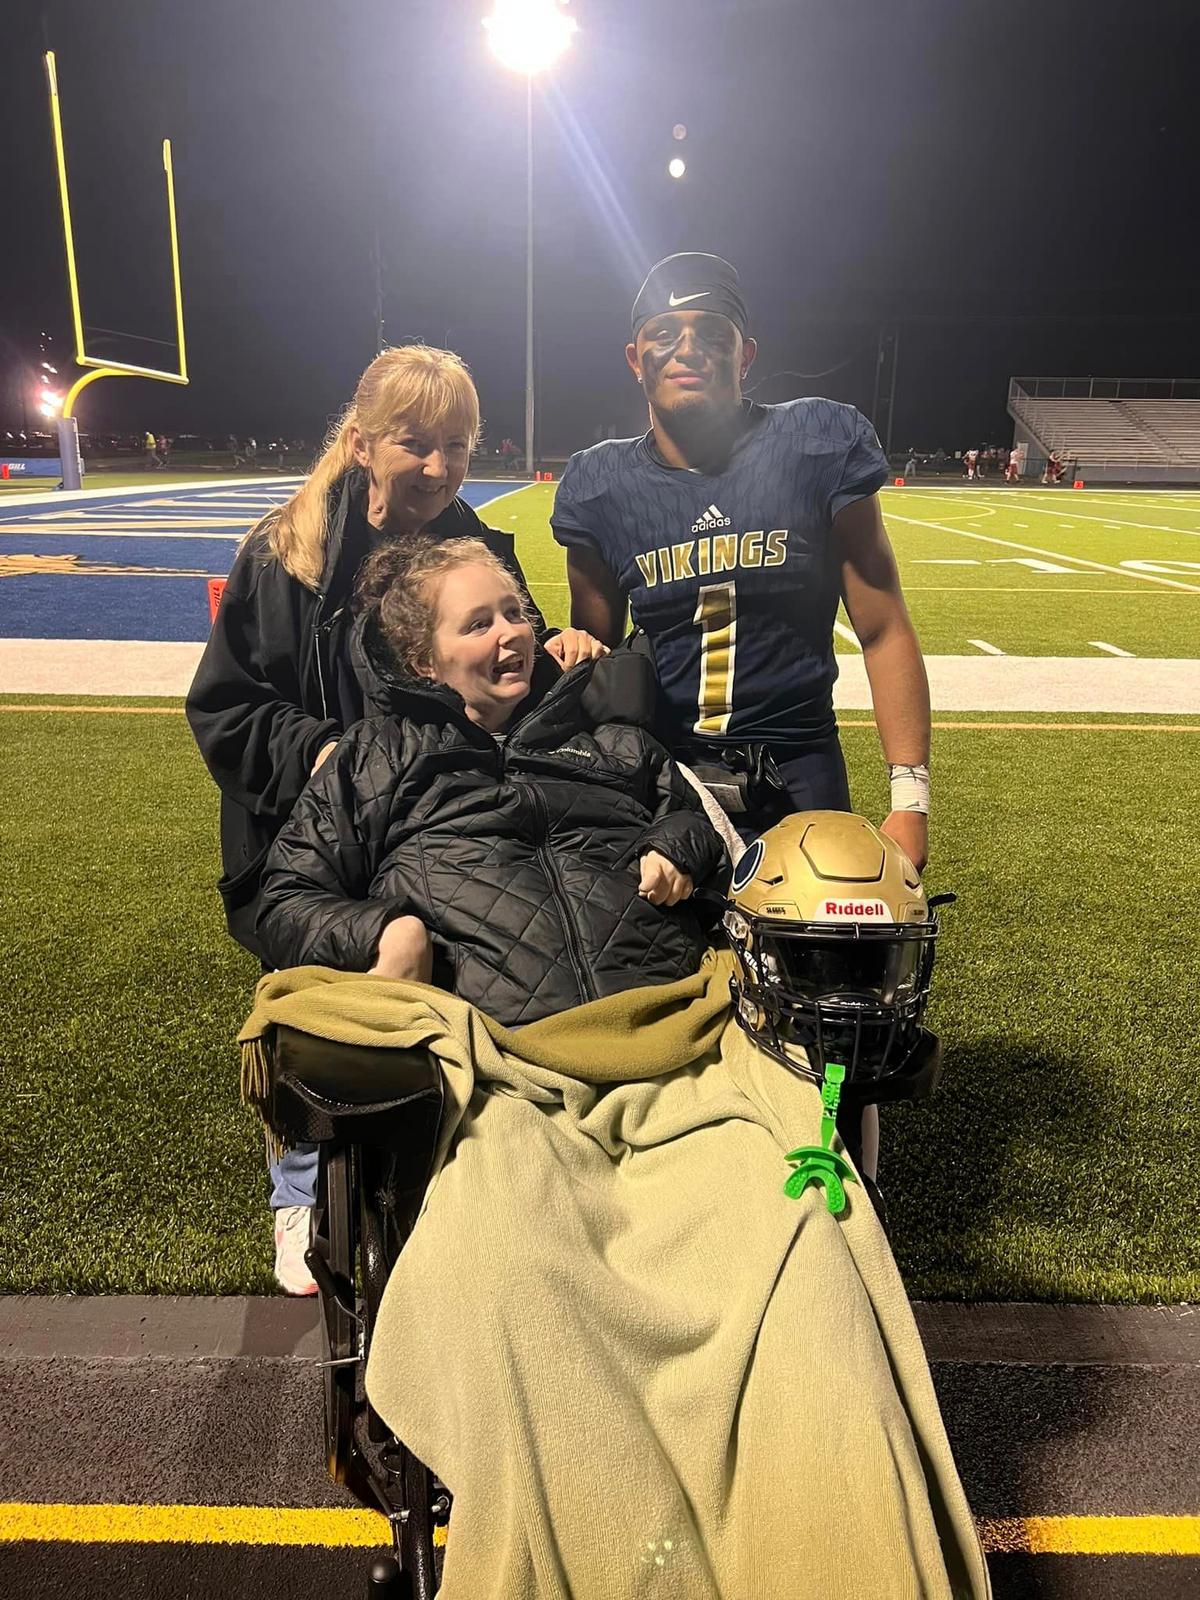 Ms. Flewellen with her mom and son Julian, who was just 11 years old when she was injured in the fatal accident. (Courtesy of <a href="https://www.facebook.com/profile.php?id=61554133355459">Jenn’s Journey: A Miracle in the Making</a>)